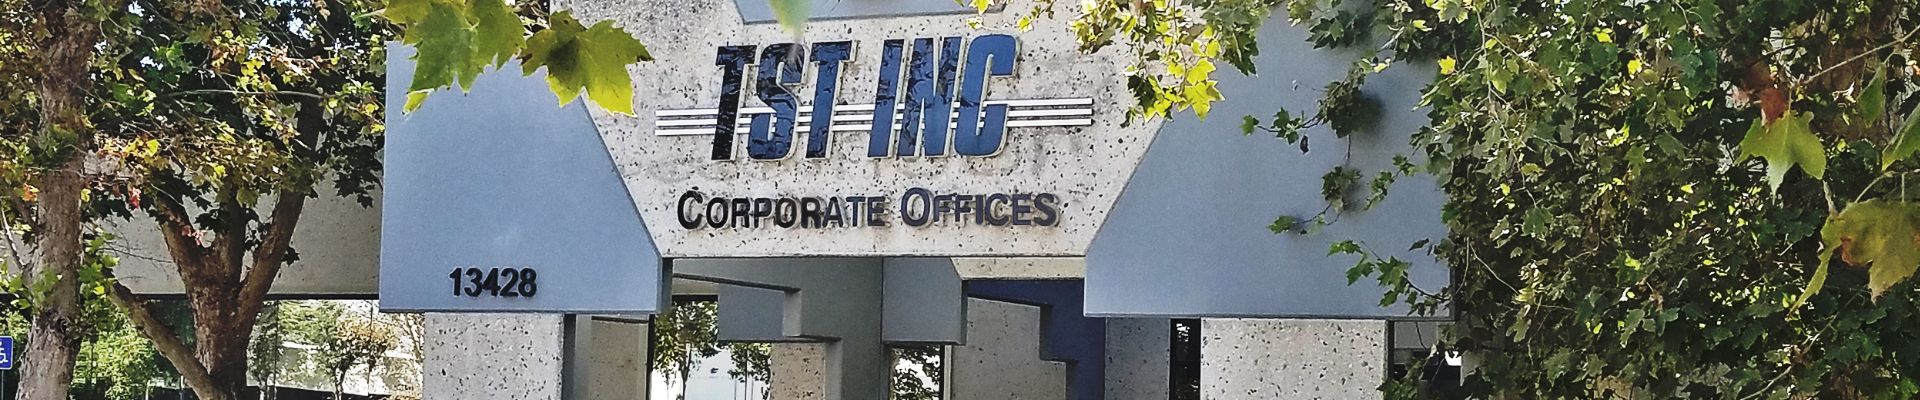 TST Inc. Corporate Offices Building